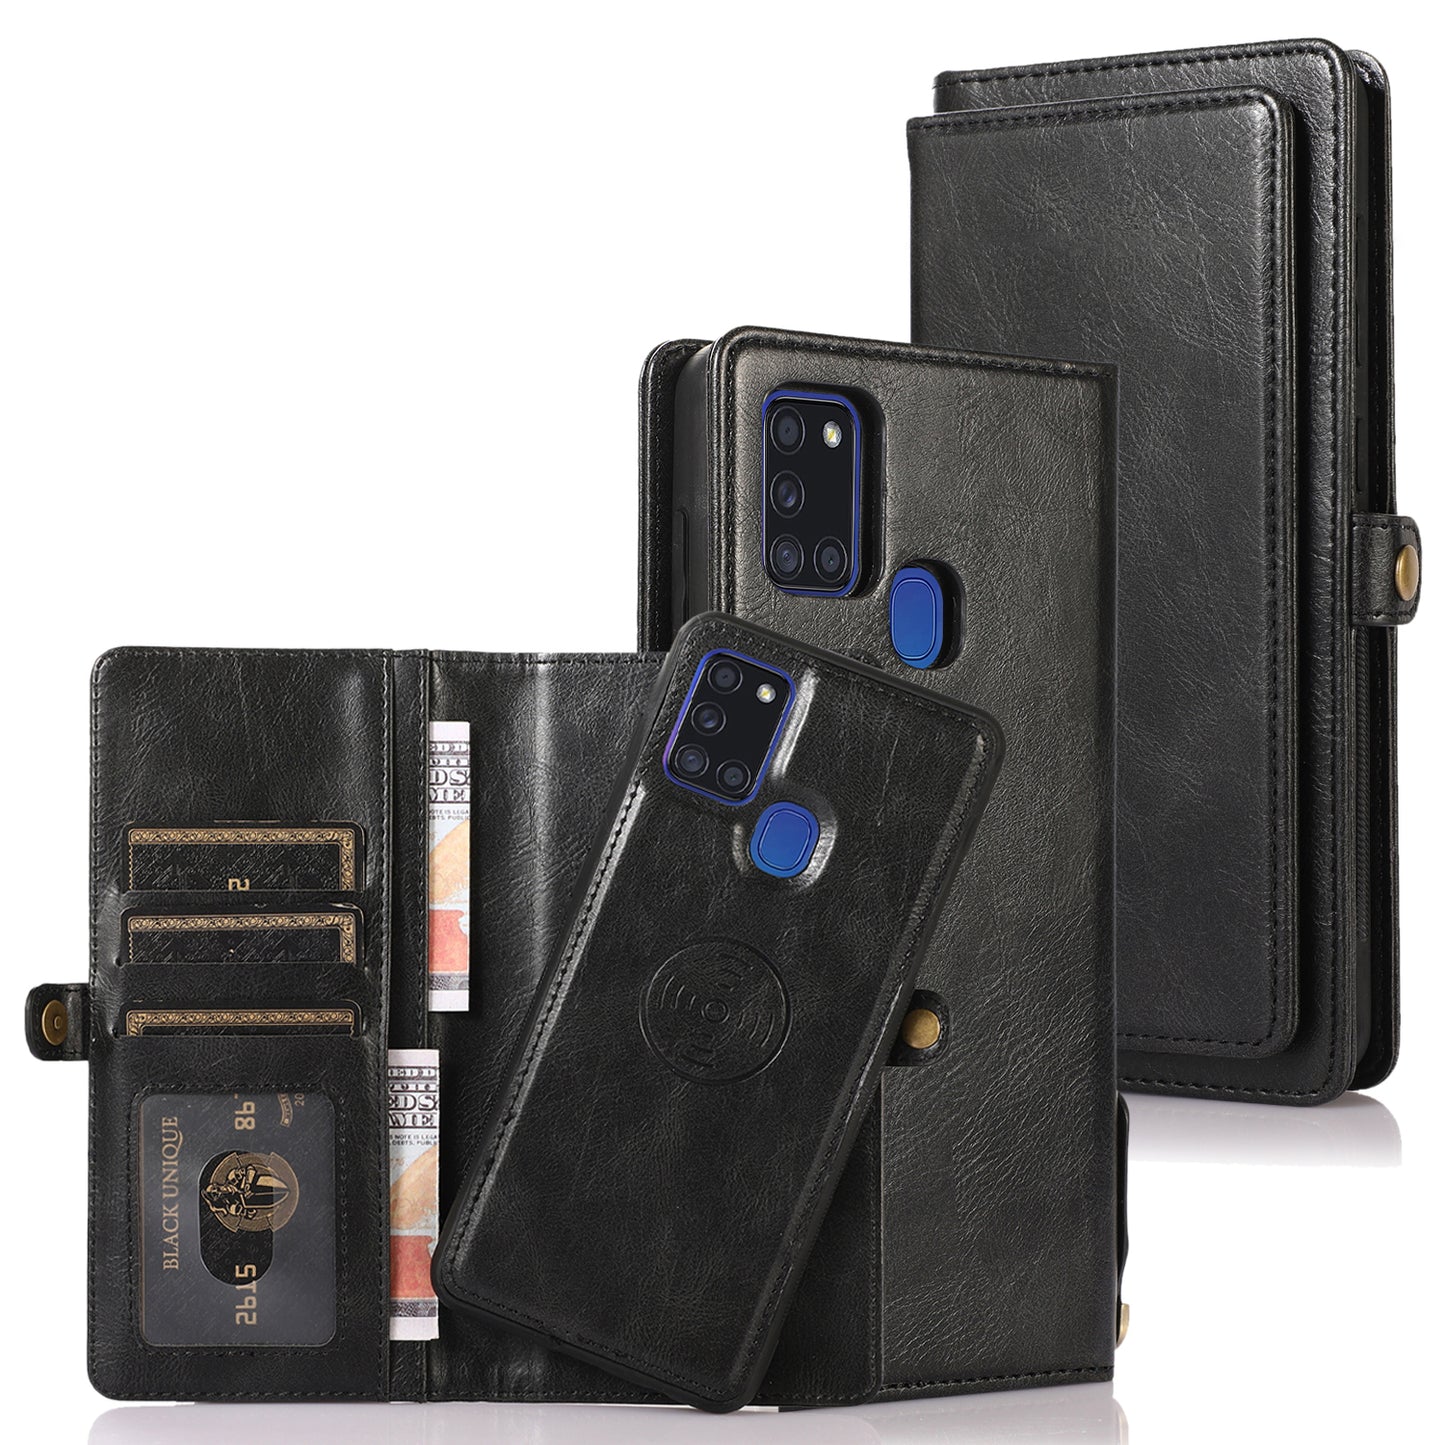 Samsung Galaxy A21s Leather Case Detachable Magnetic Multiple Card Slots Cash Pockets